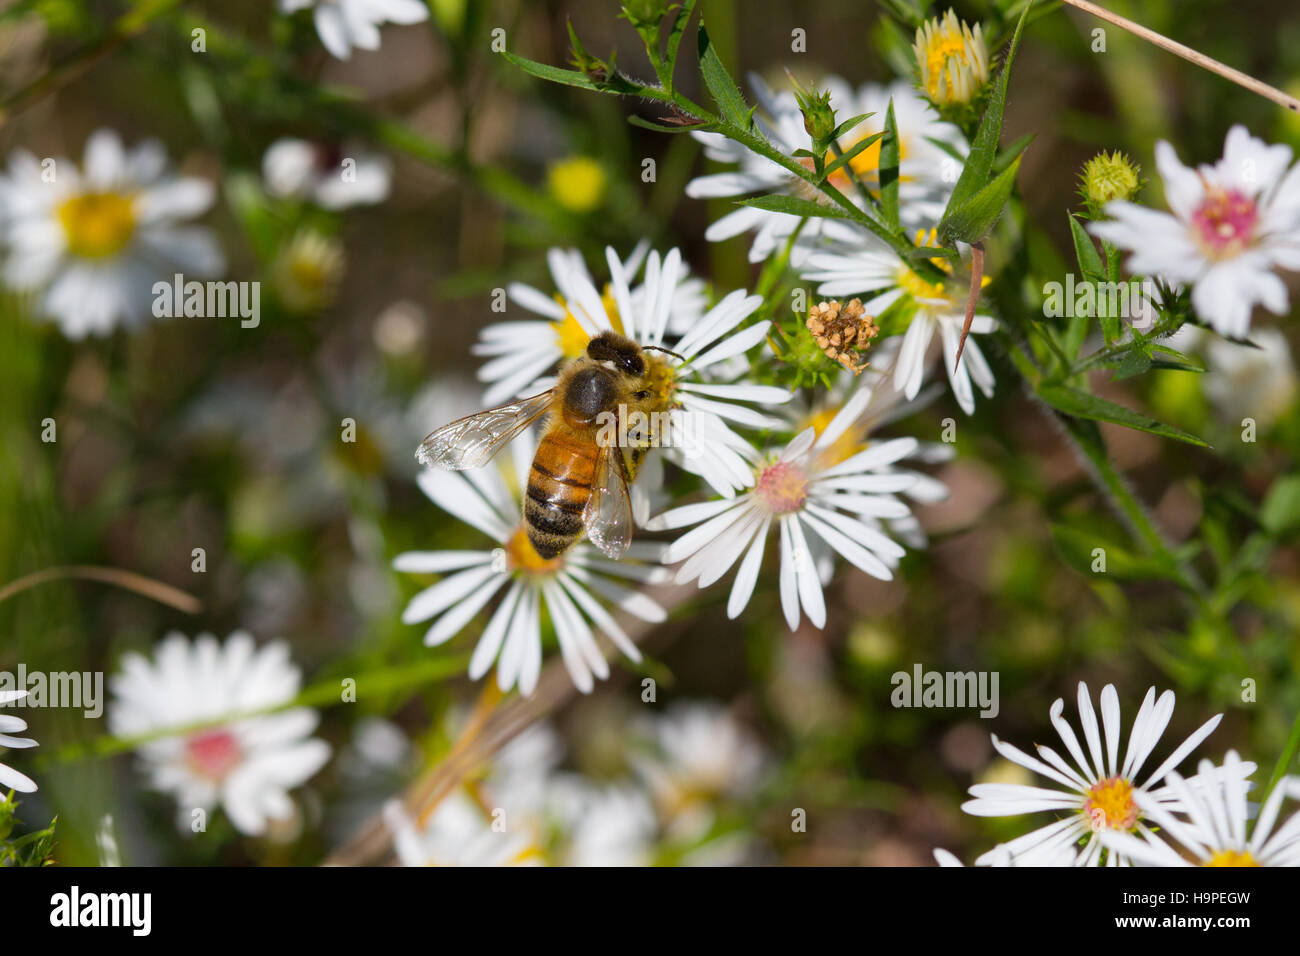 A honey bee worker (Apis mellifera) gathering pollen and nectar from white heath asters (Symphyotrichum ericoides), Indiana, USA Stock Photo